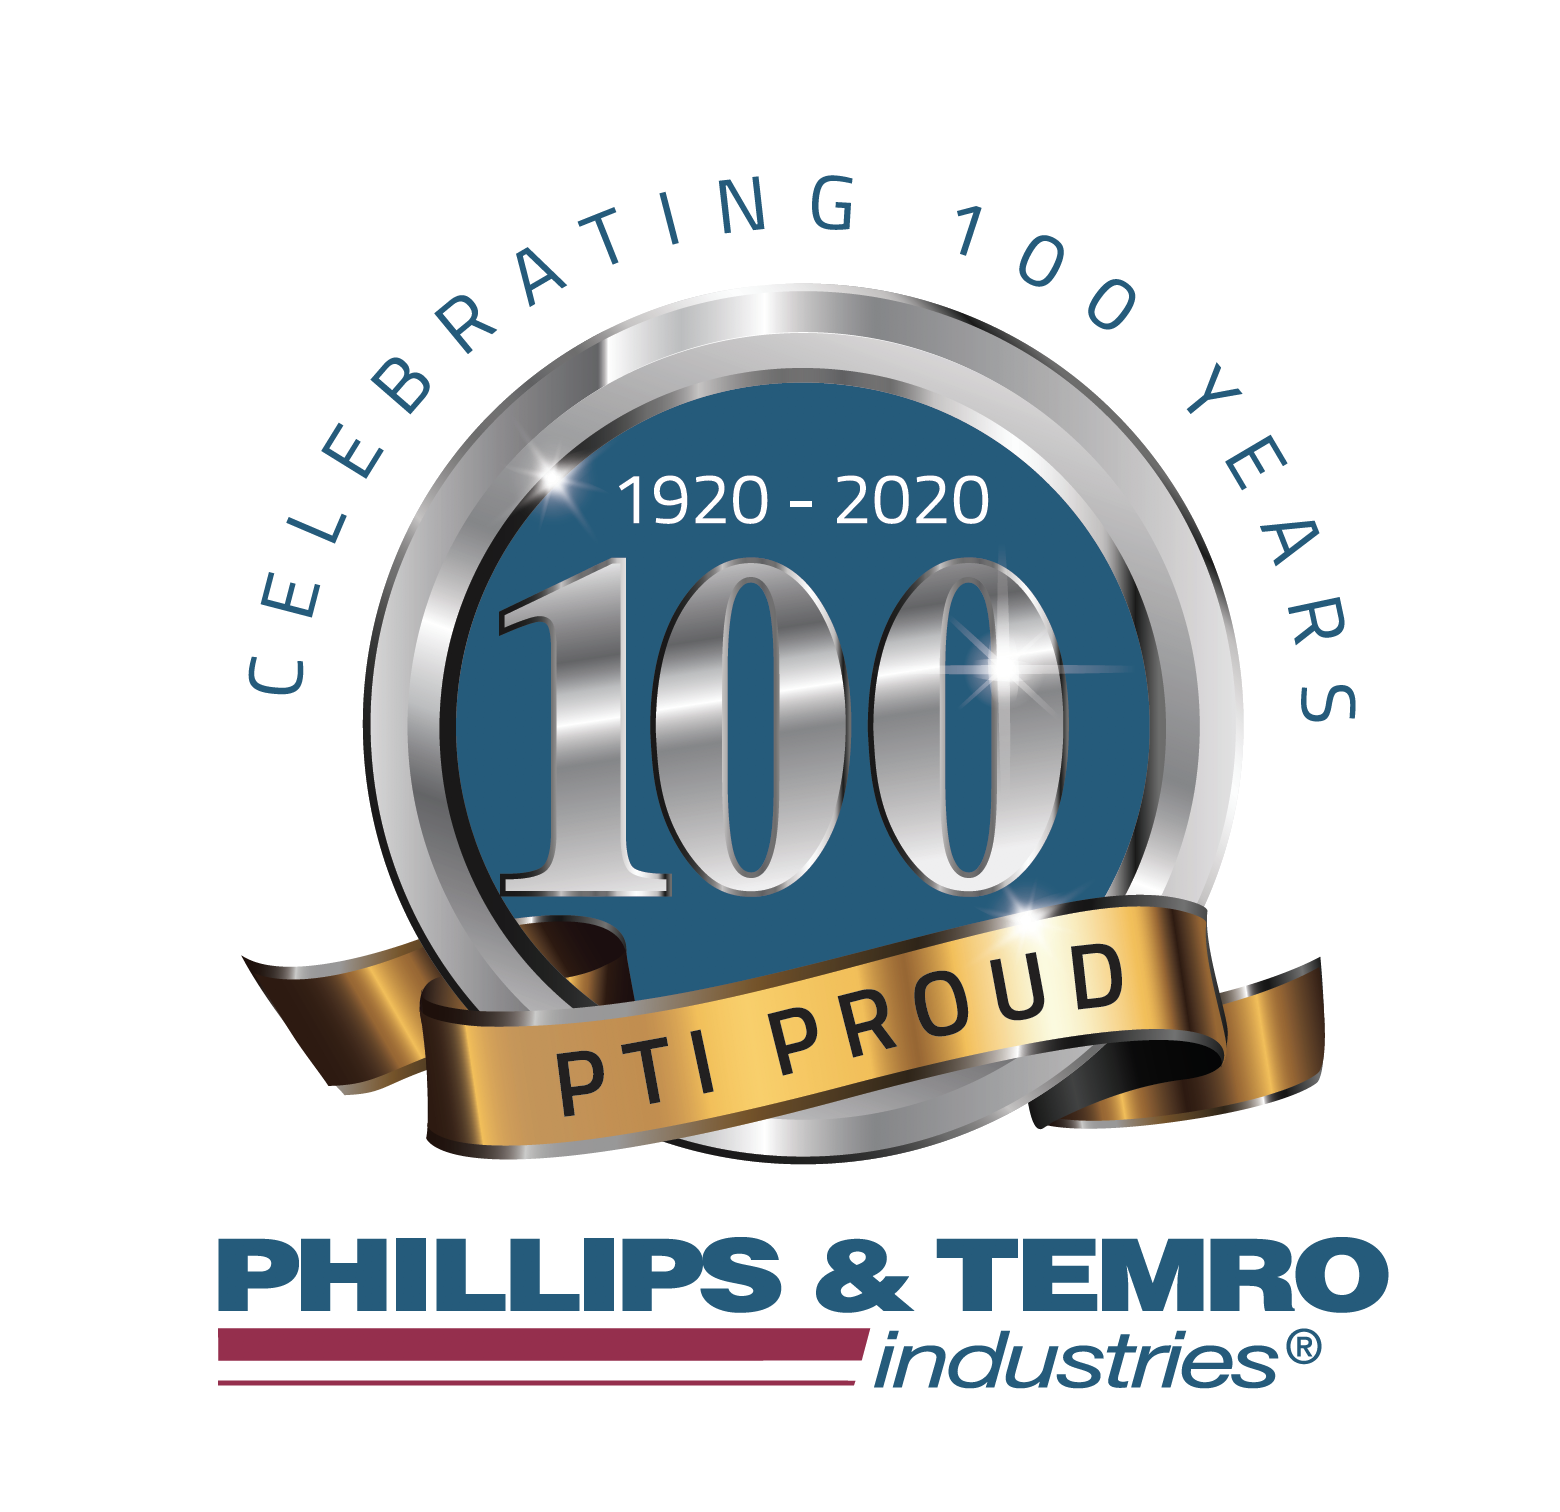 Phillips & Temro Industries Celebrates 100 Years of Excellence in Providing Custom Engineered Thermal Systems and Electrical Solutions